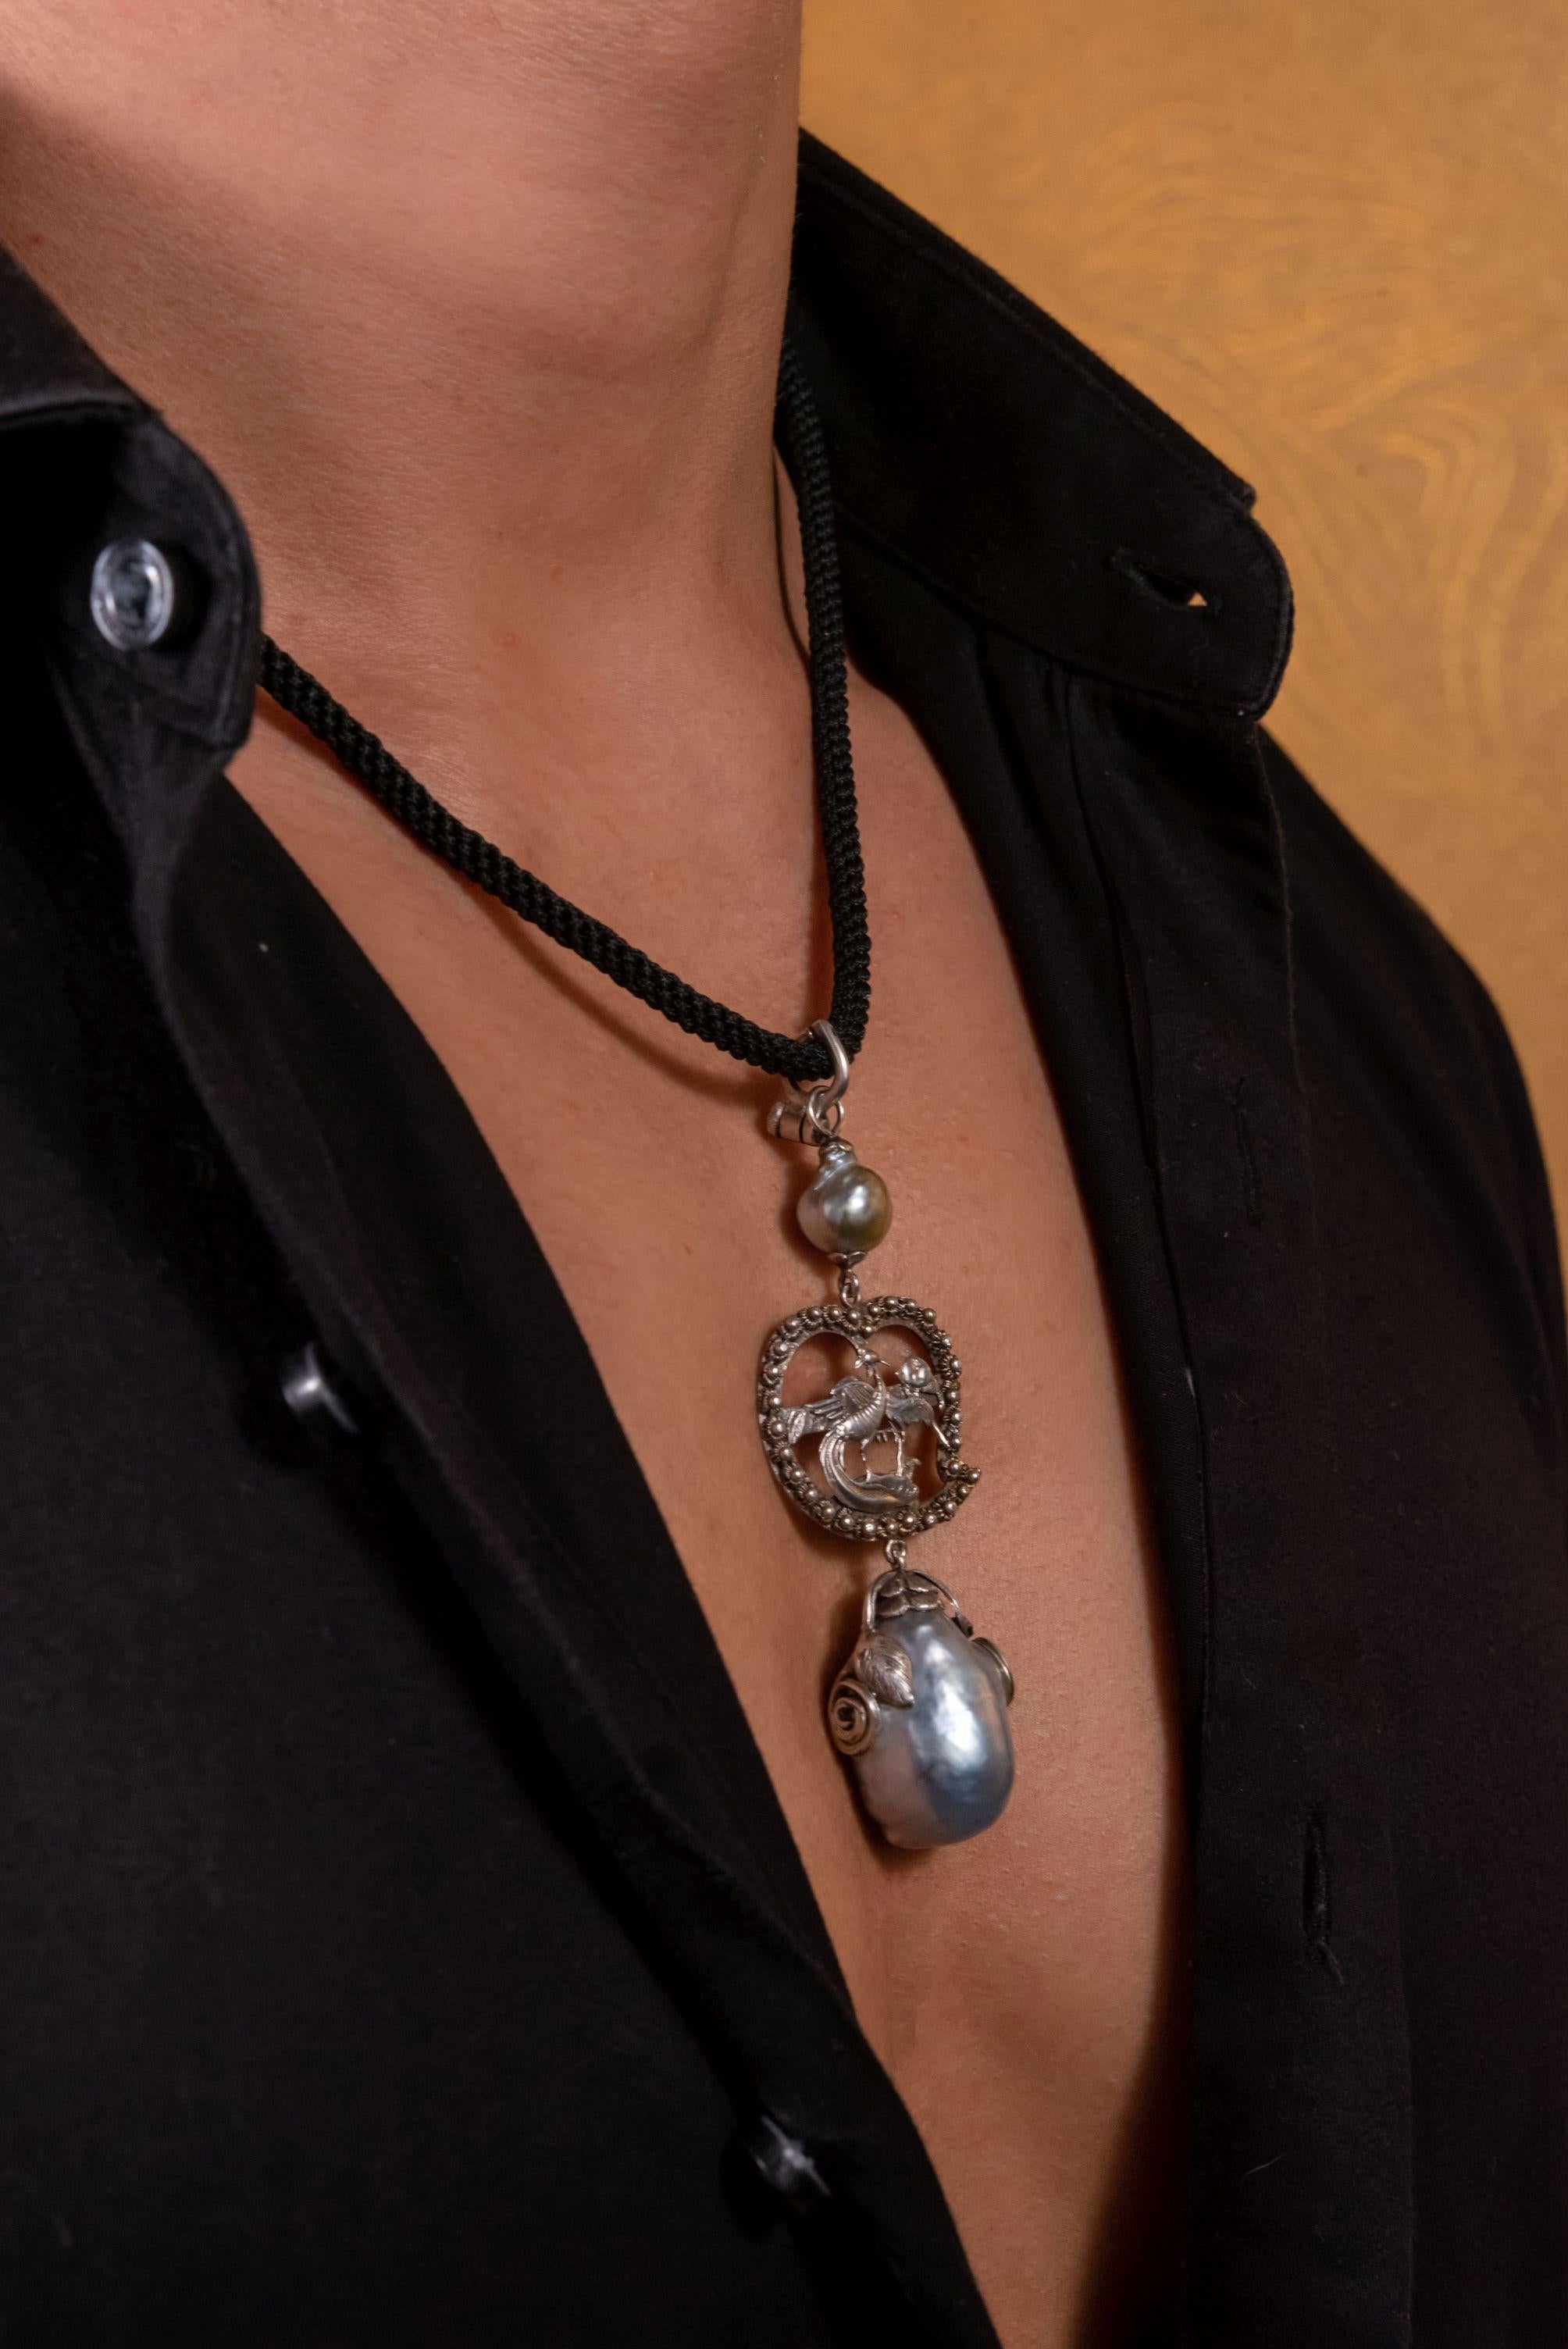 Rise from the ashes in style with our vintage Chinese phoenix pendant necklace. The ultimate symbol of hope and rebirth, this stunning phoenix pendant sits between two statement baroque south sea pearls. With intricate detail and a black woven